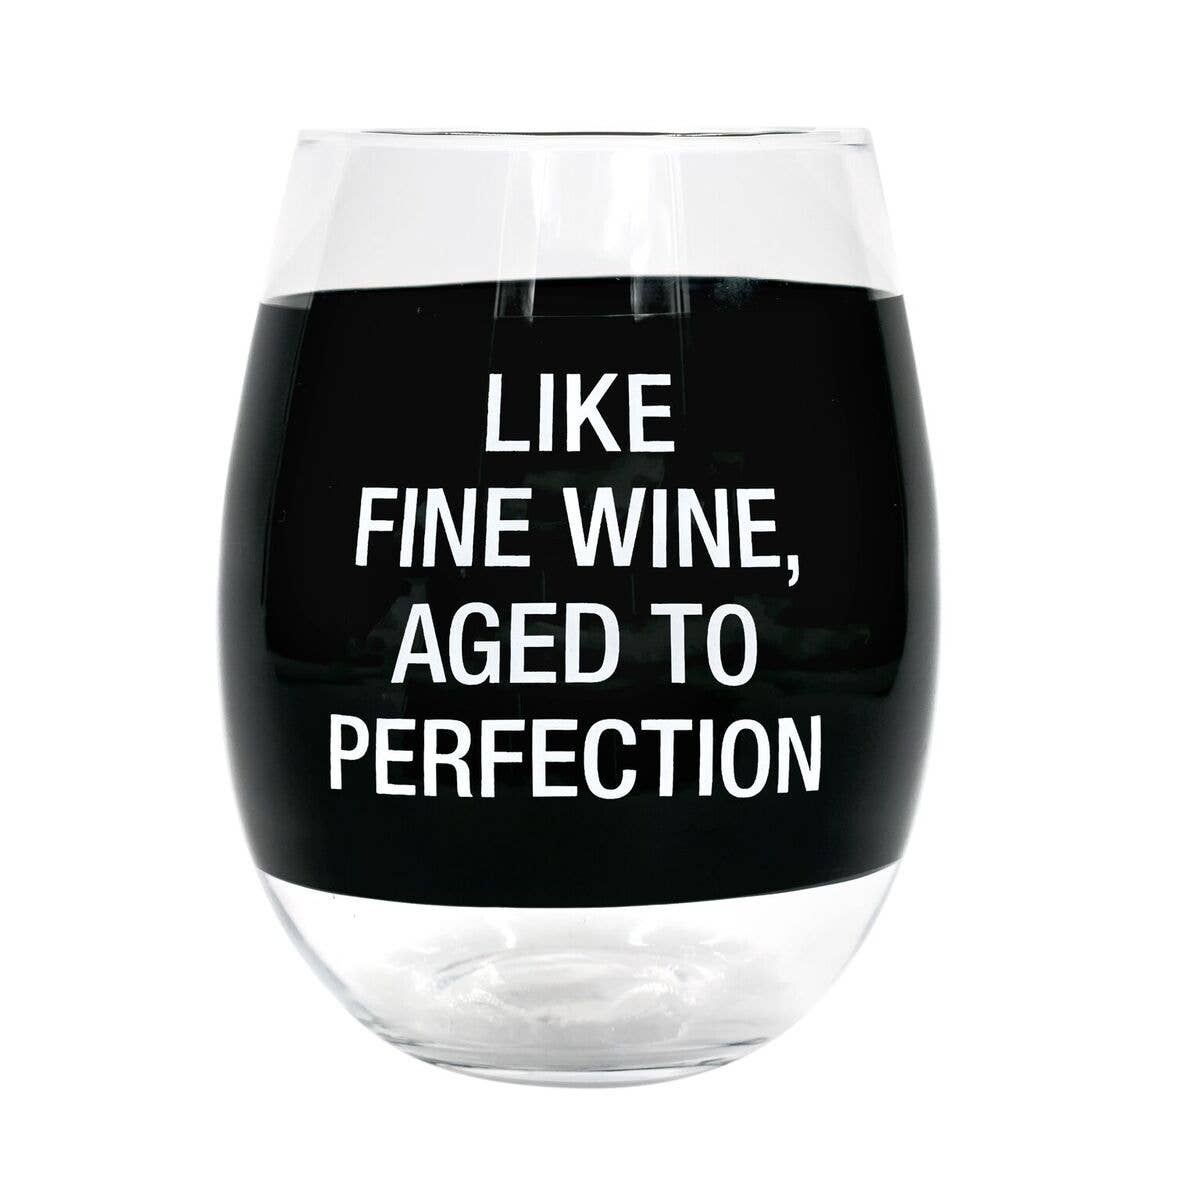 About Face Designs Inc. Aged to Perfection Stemless Wine Glass